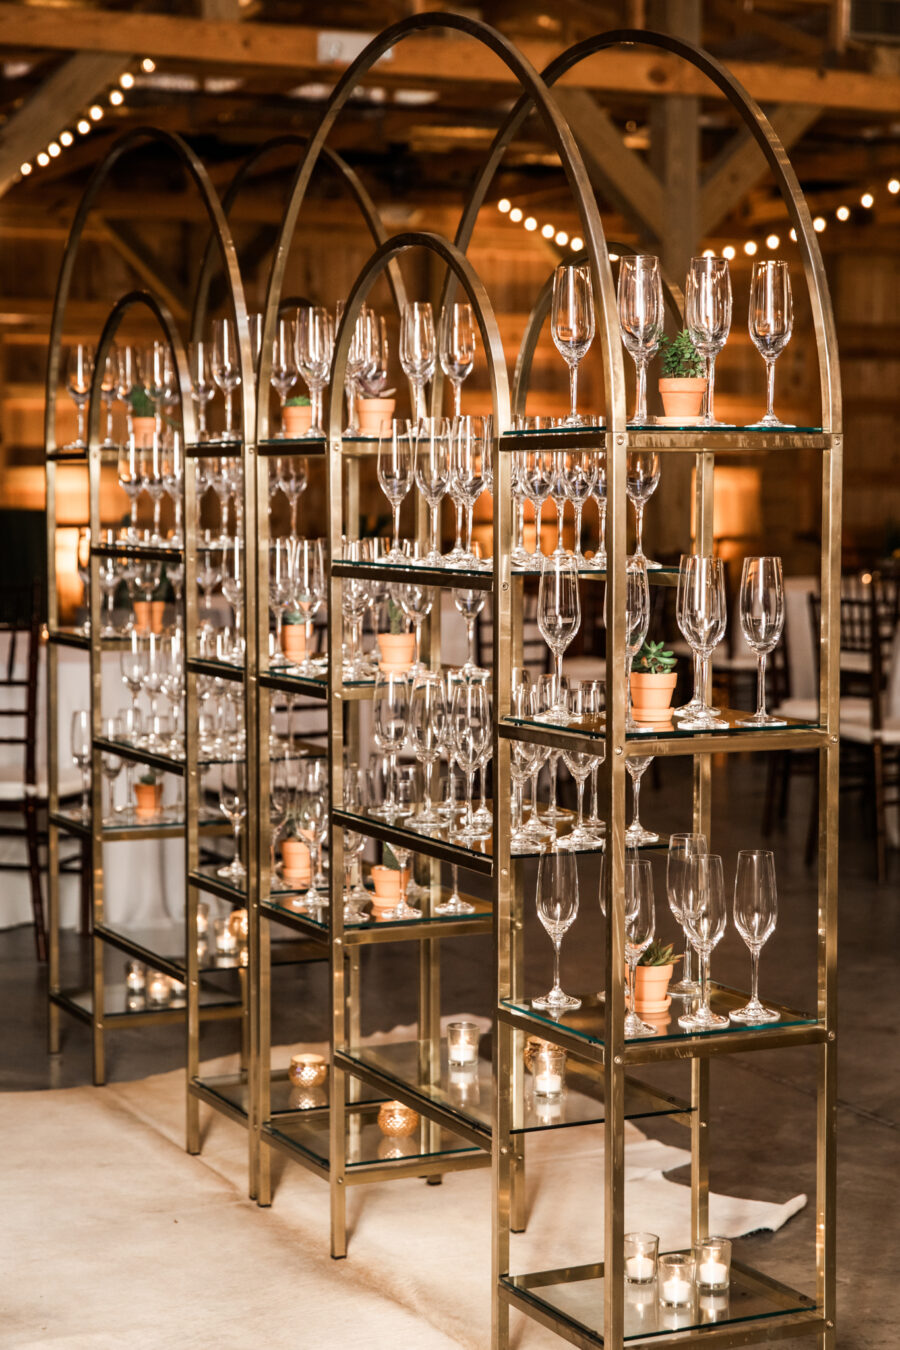 Wedding champagne bar: Western Inspired Wedding by Laurie D'Anne Events featured on Nashville Bride Guide